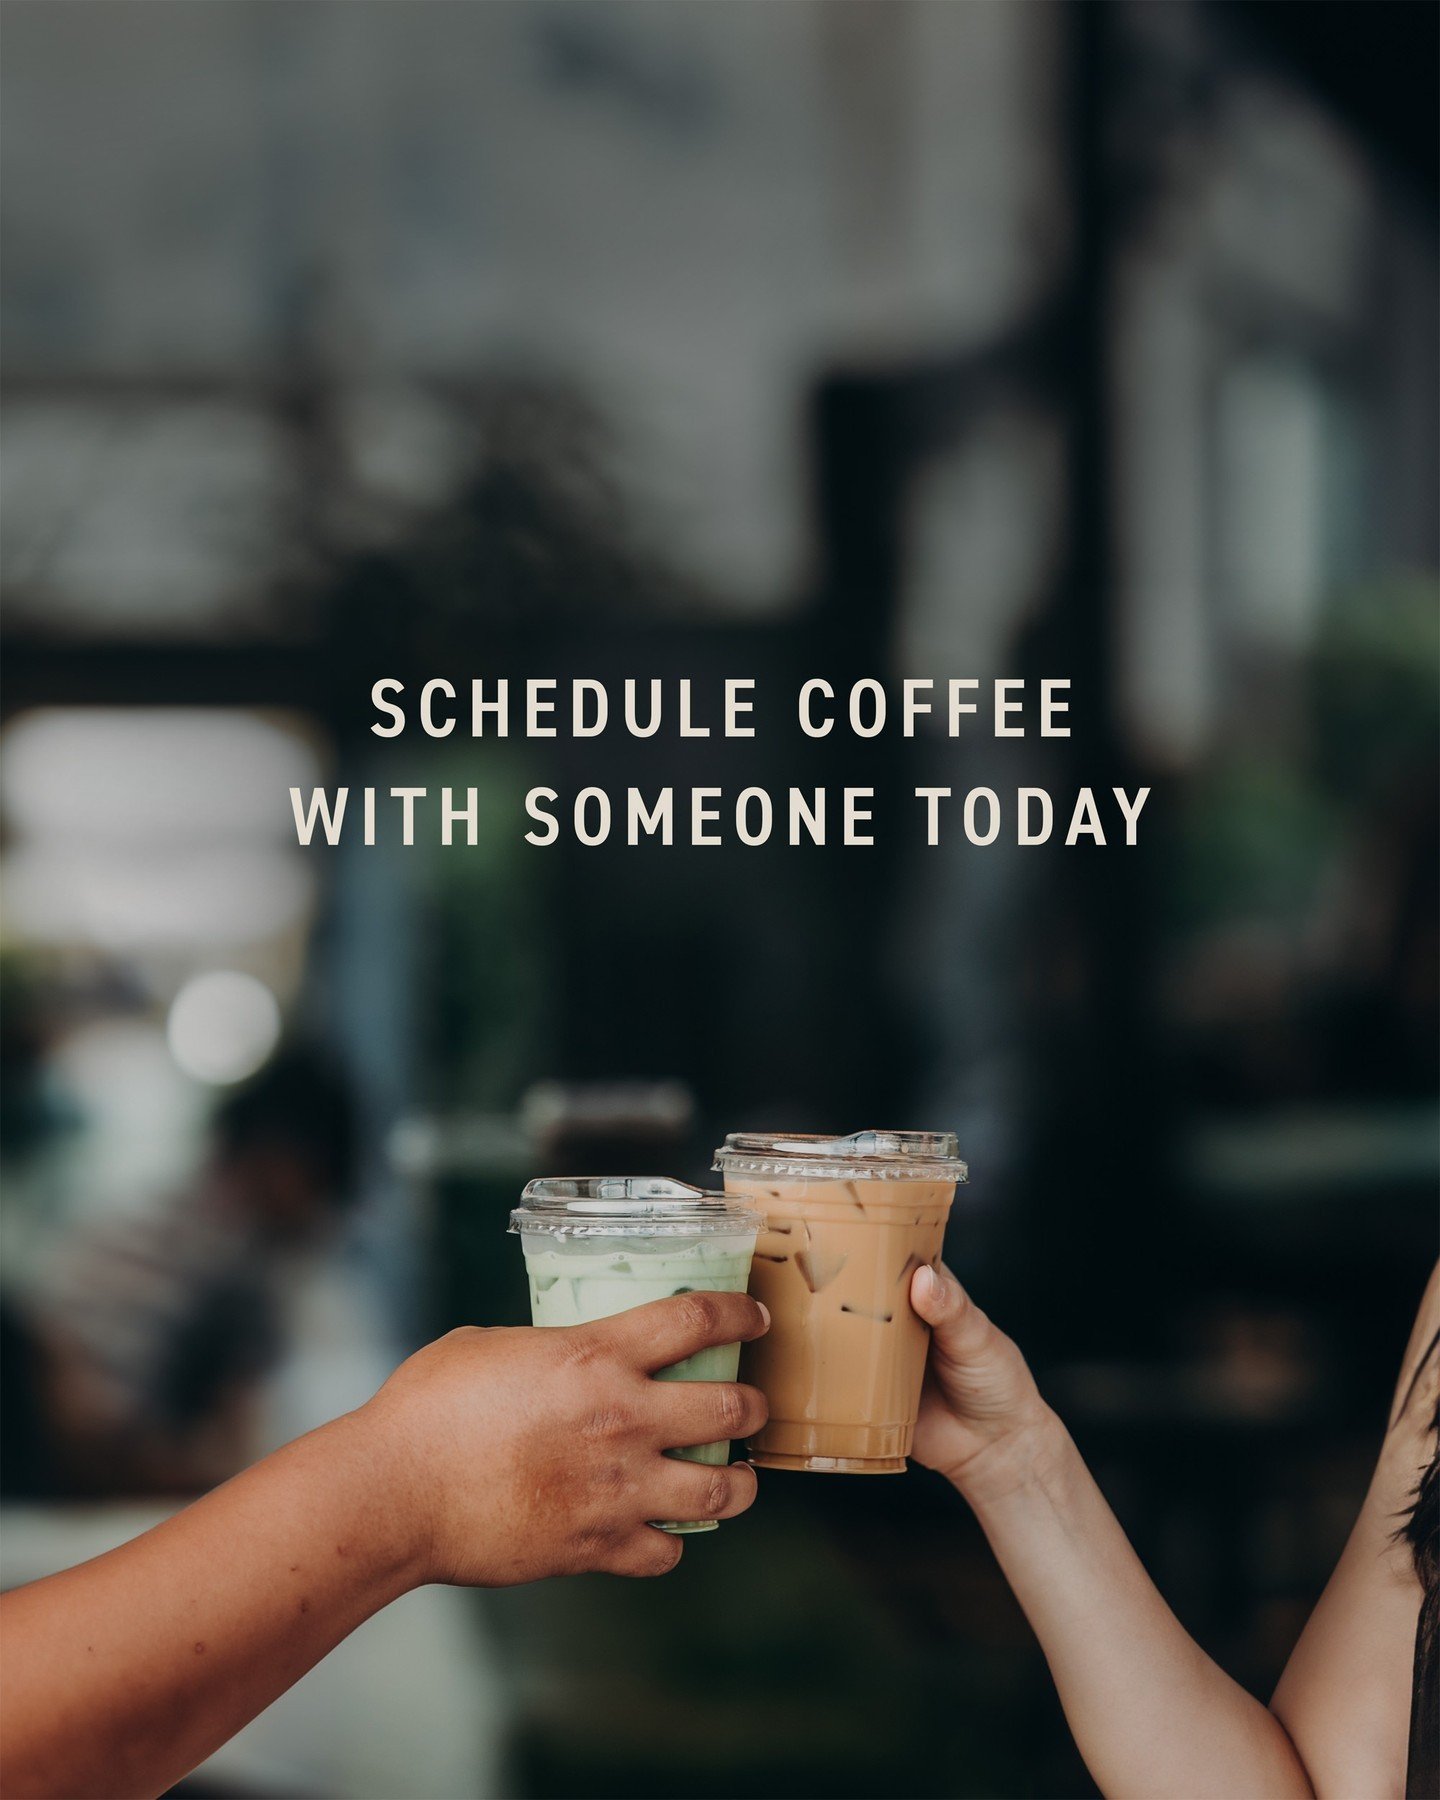 Schedule coffee with someone today!
.
.
.
#church #god #morning #jesus #christ #love #christian #coffee #someone #invite